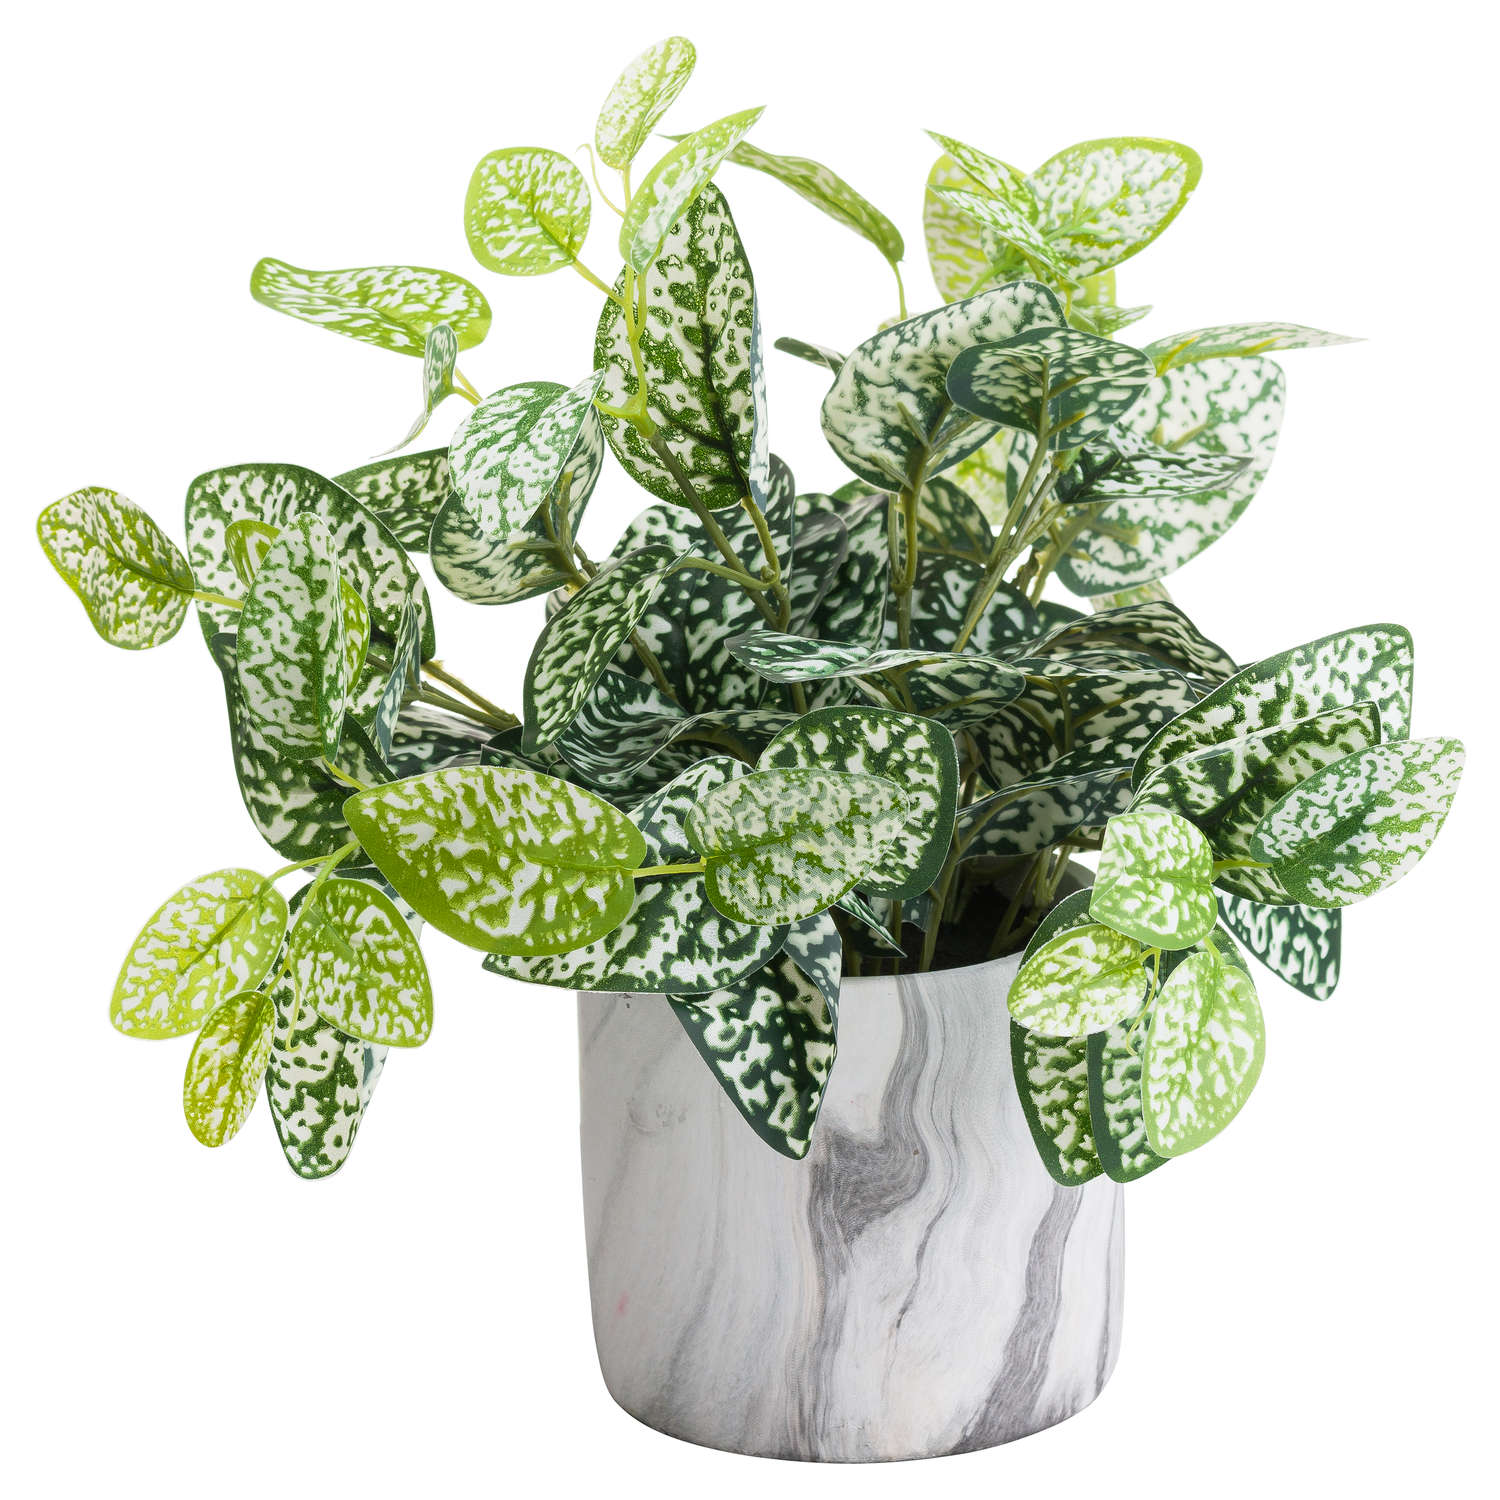 Variegated White And Green Nerve Plant - Image 4